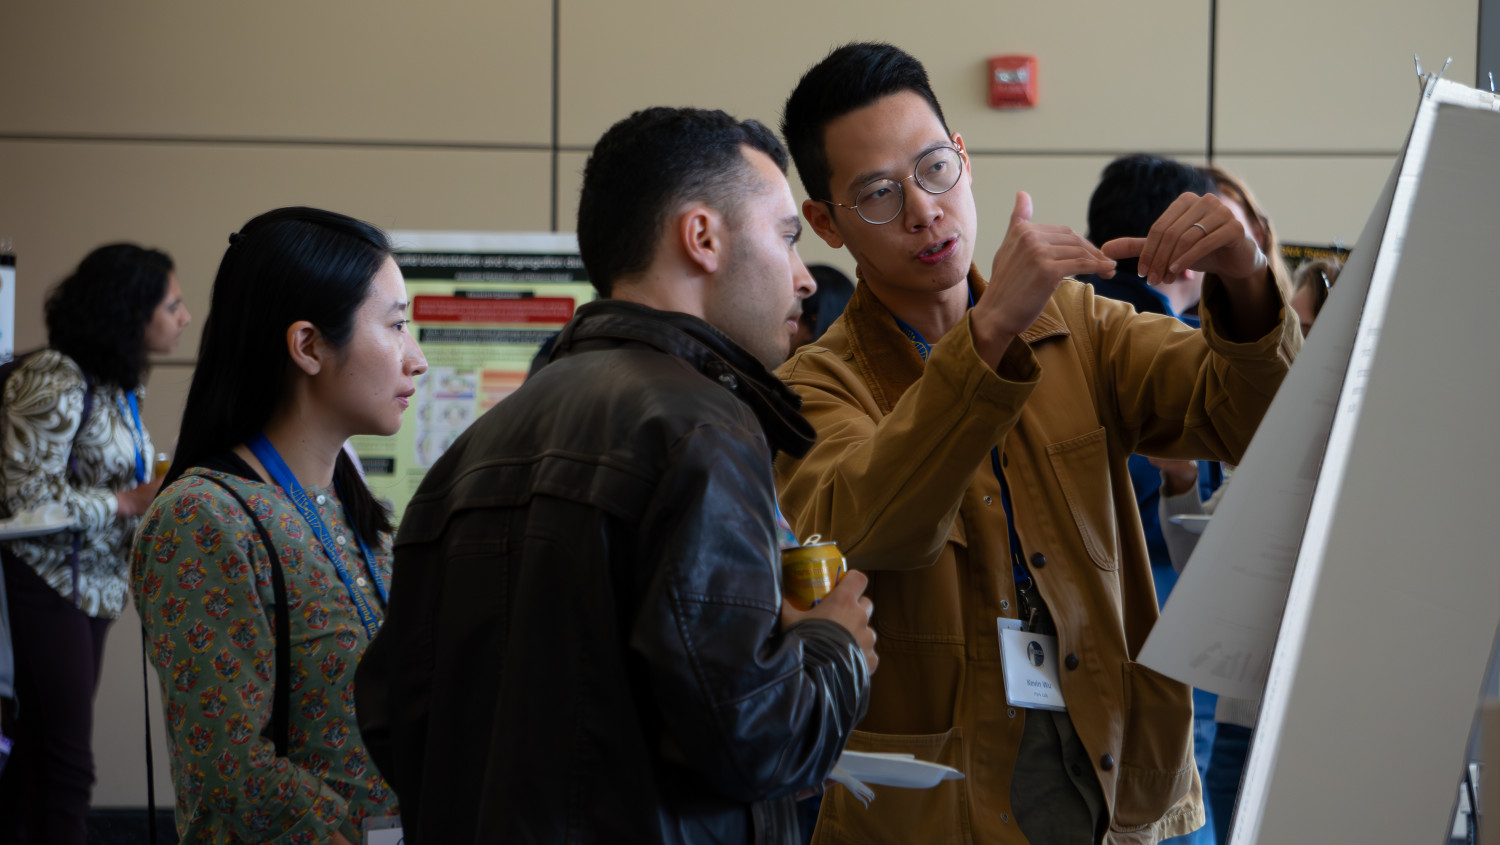 Kevin Wu discussing his research at the poster session